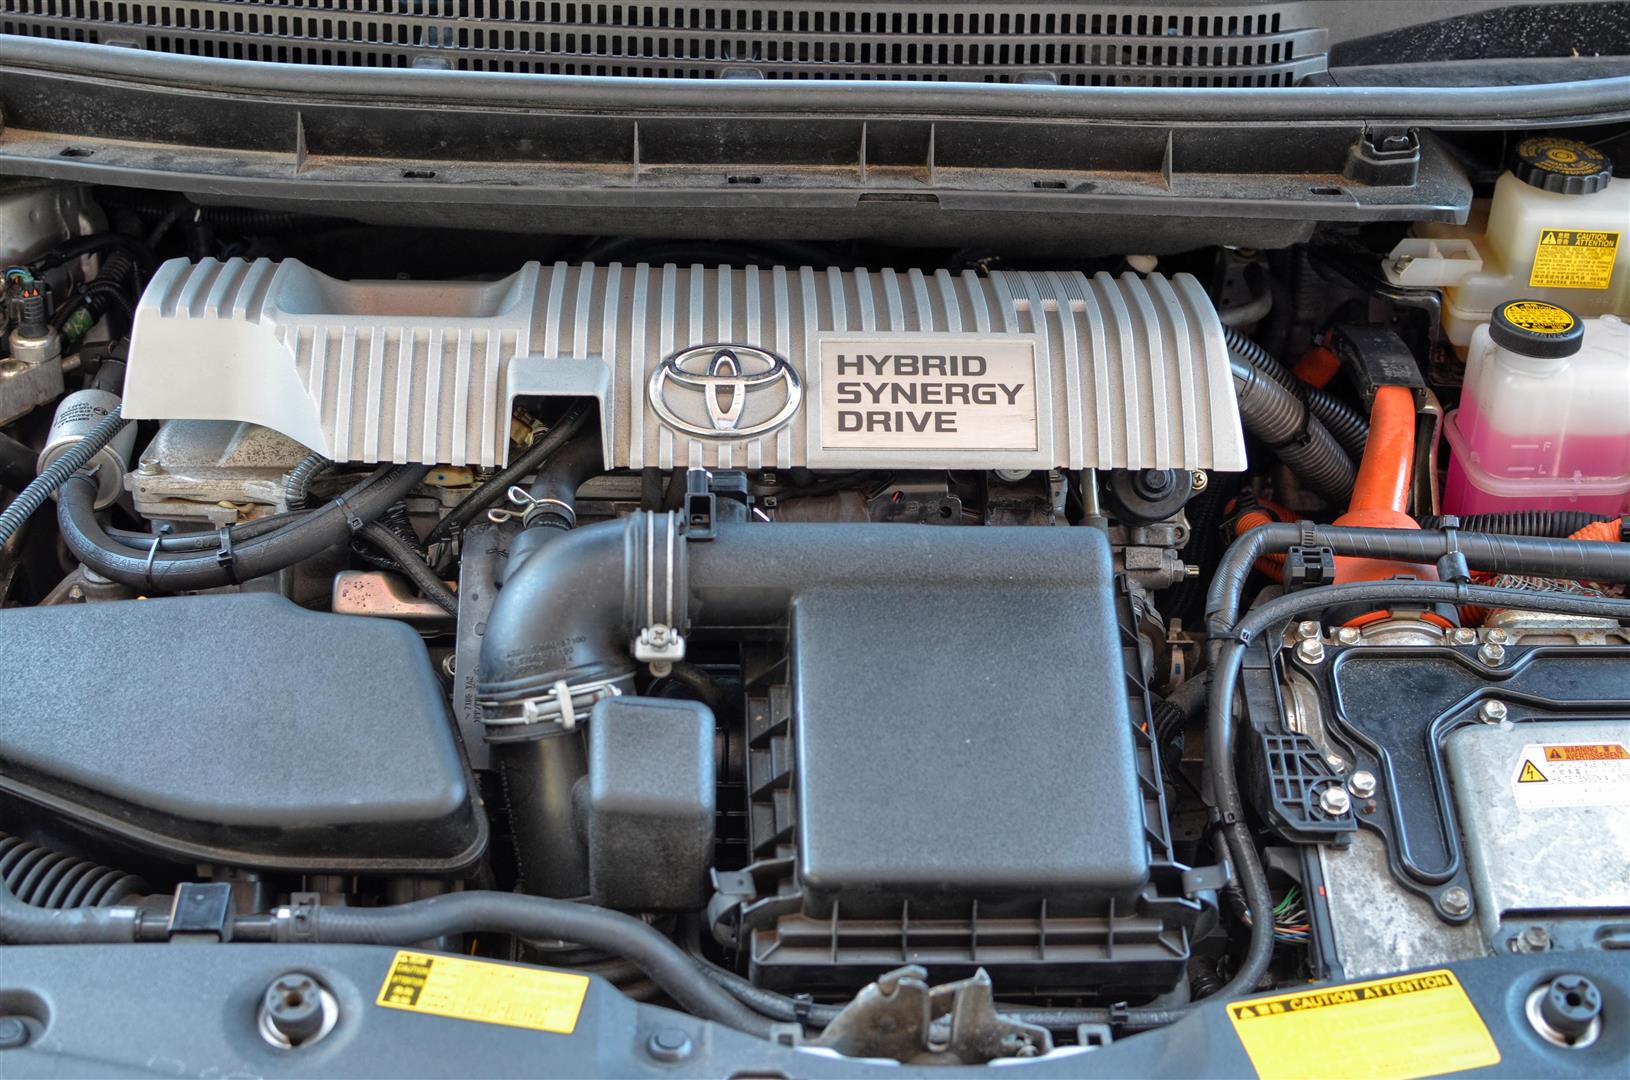 Hybrid Car Repairs: 3 Awesome Tips To Avoid Them and Save Money